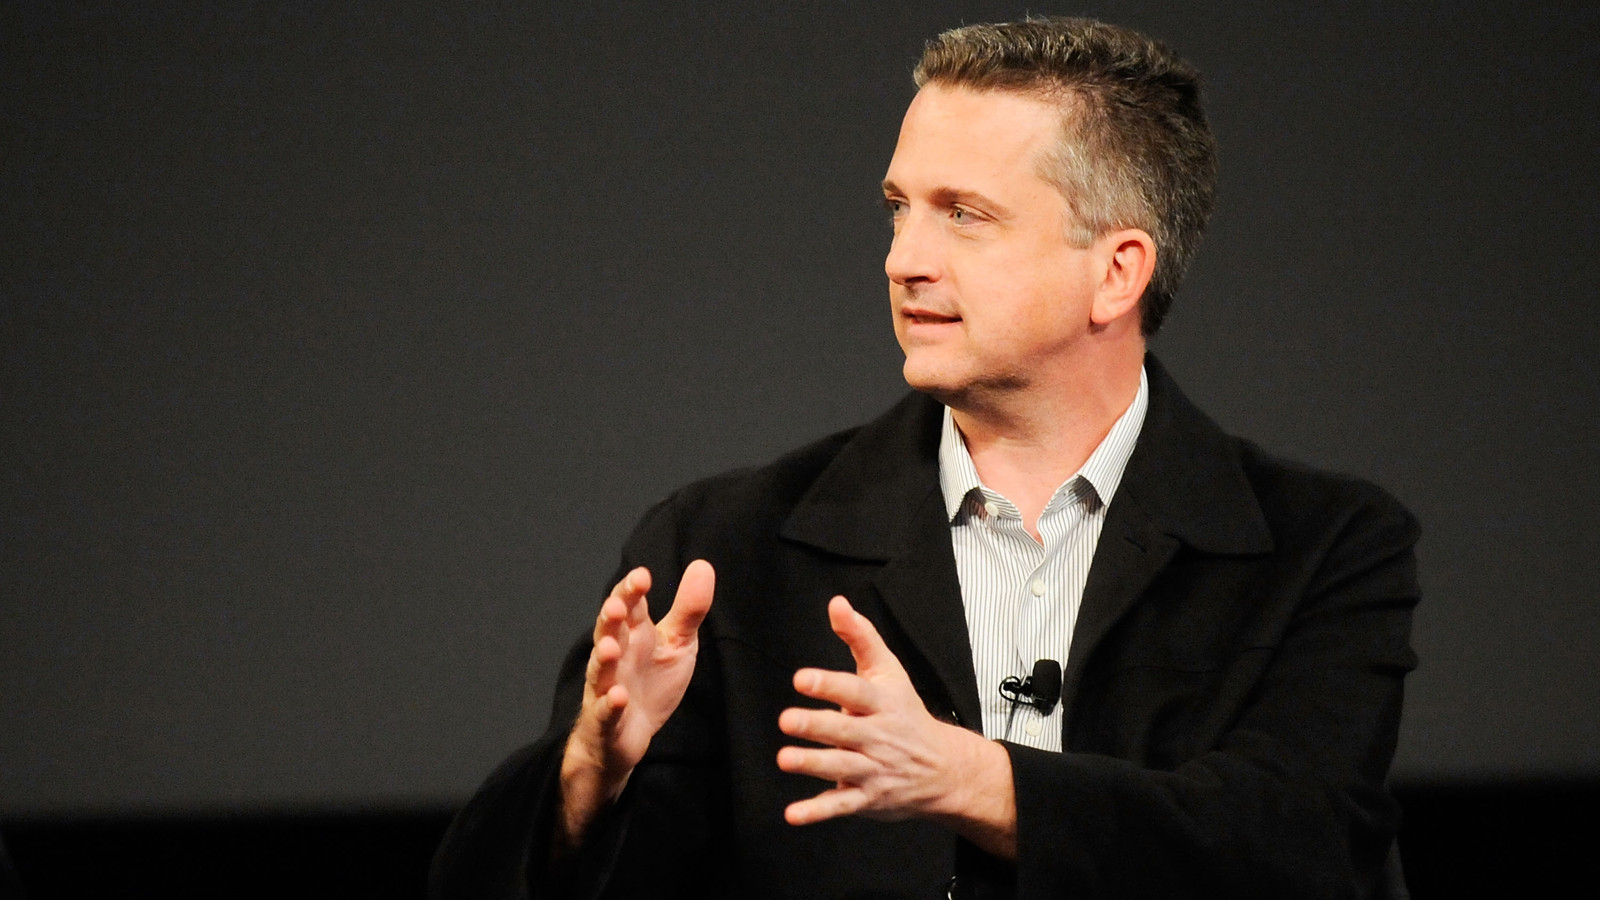 ESPN's Bill Simmons suspended for Goodell rant; barred from Twitter